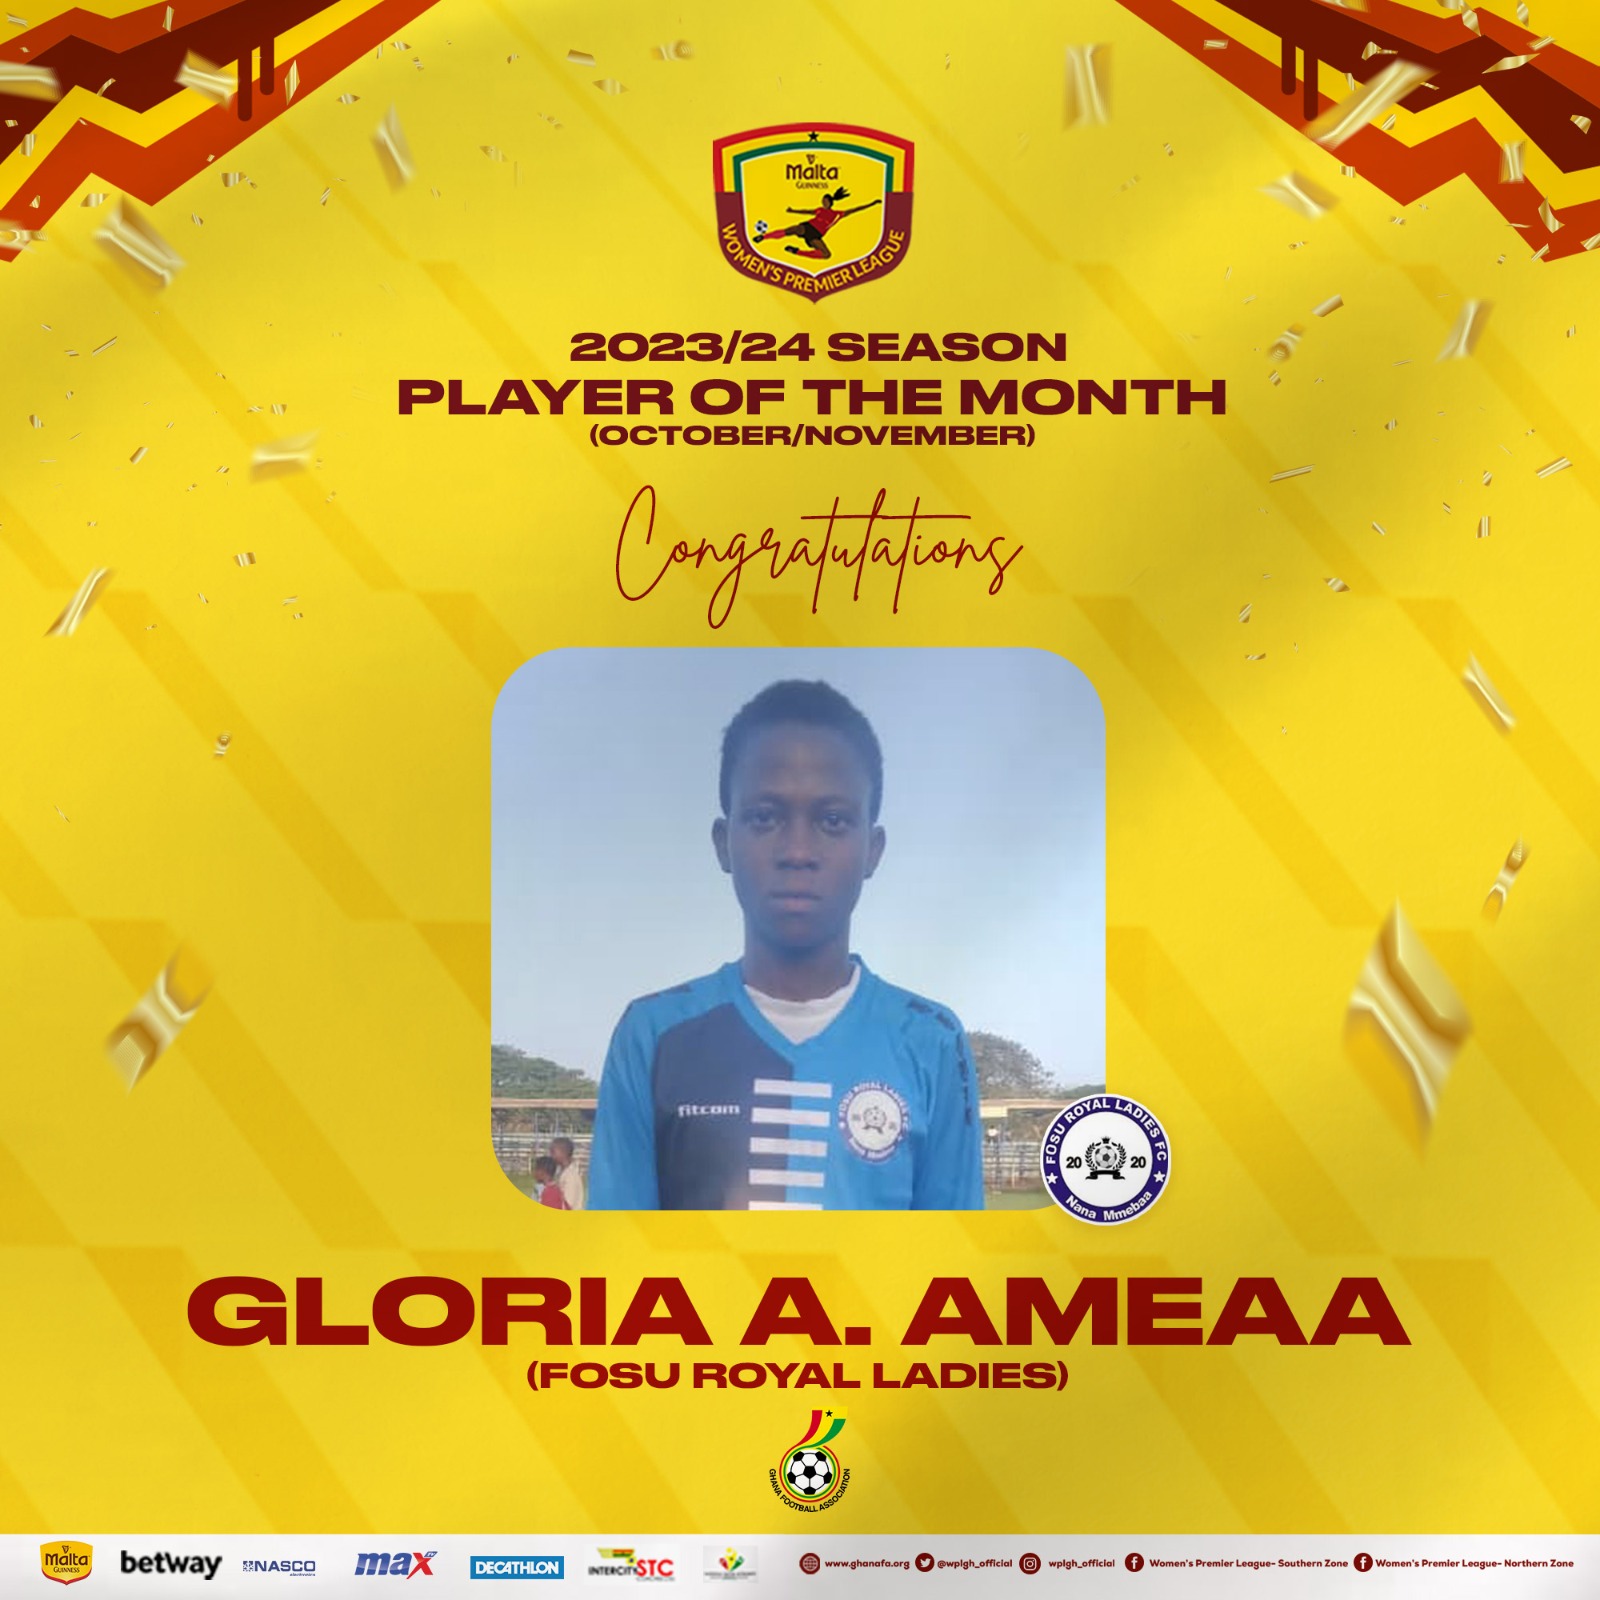 Gloria Ameaa wins NASCO Player of the Month for October/November award